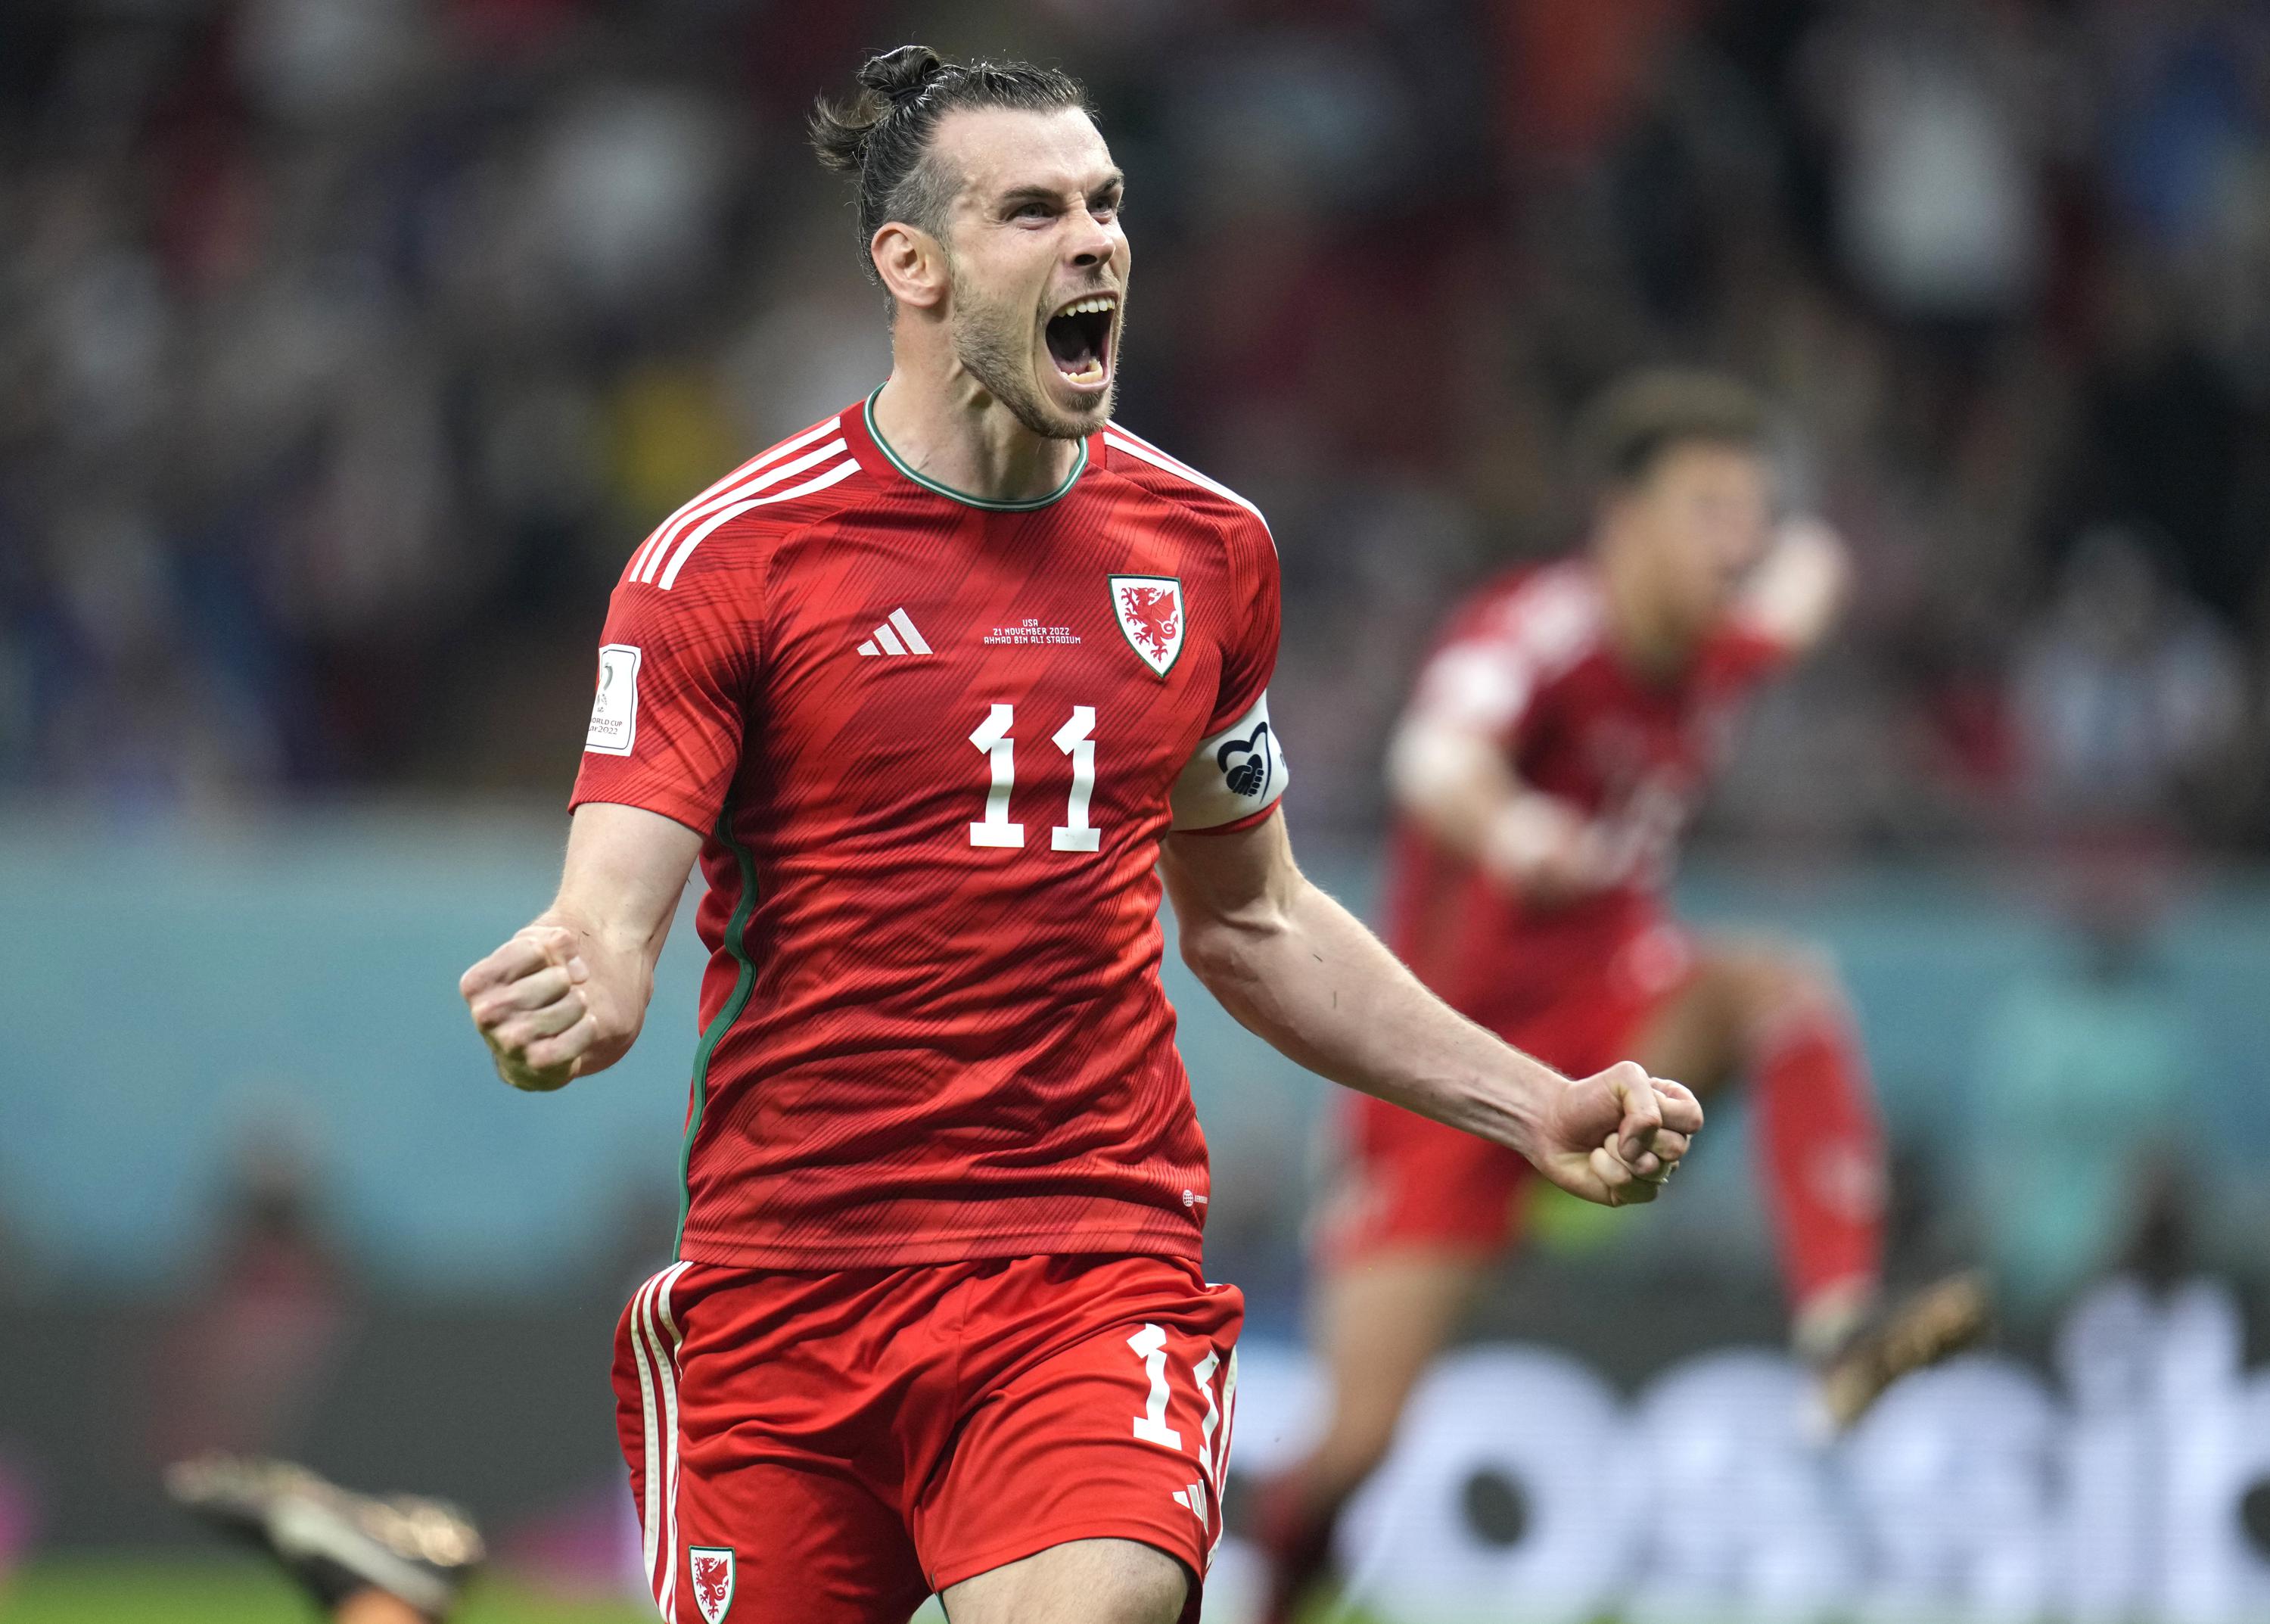 Bale retires at 33 with 5 CL titles, many Wales memories